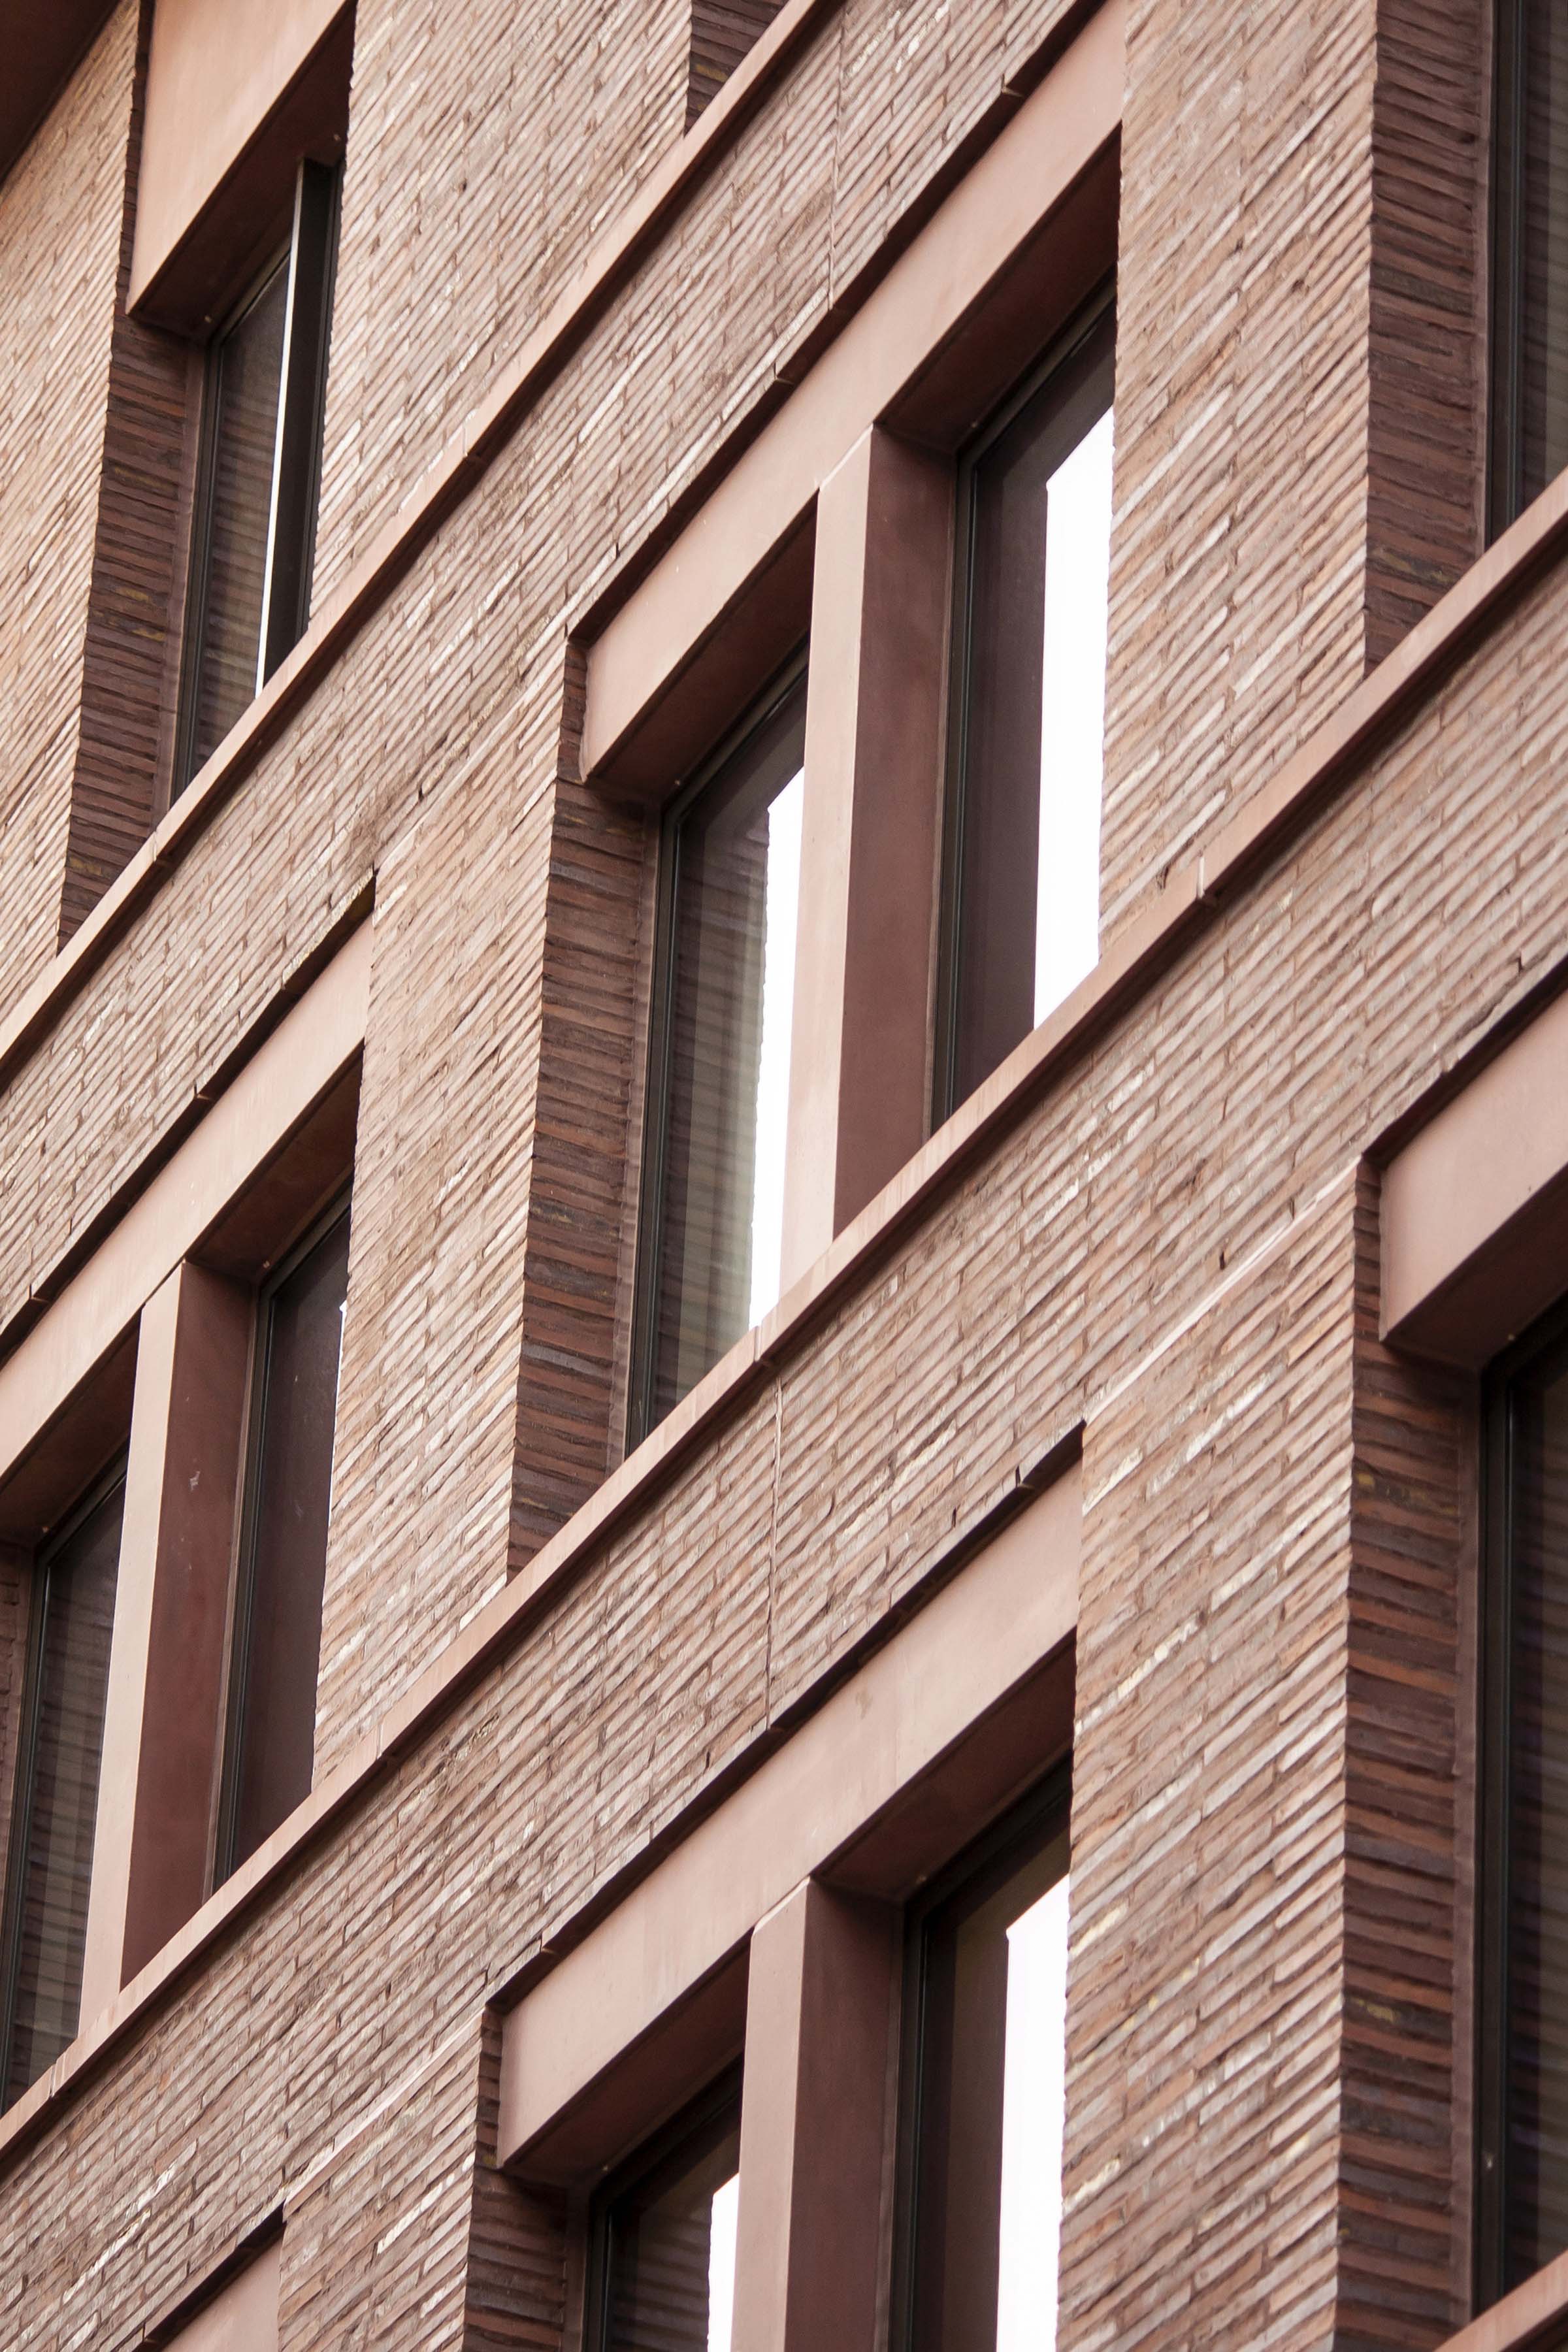 detail photo of the facade shows the handmade bricks flush with the lintels and window casings at 11-19 Jane Street